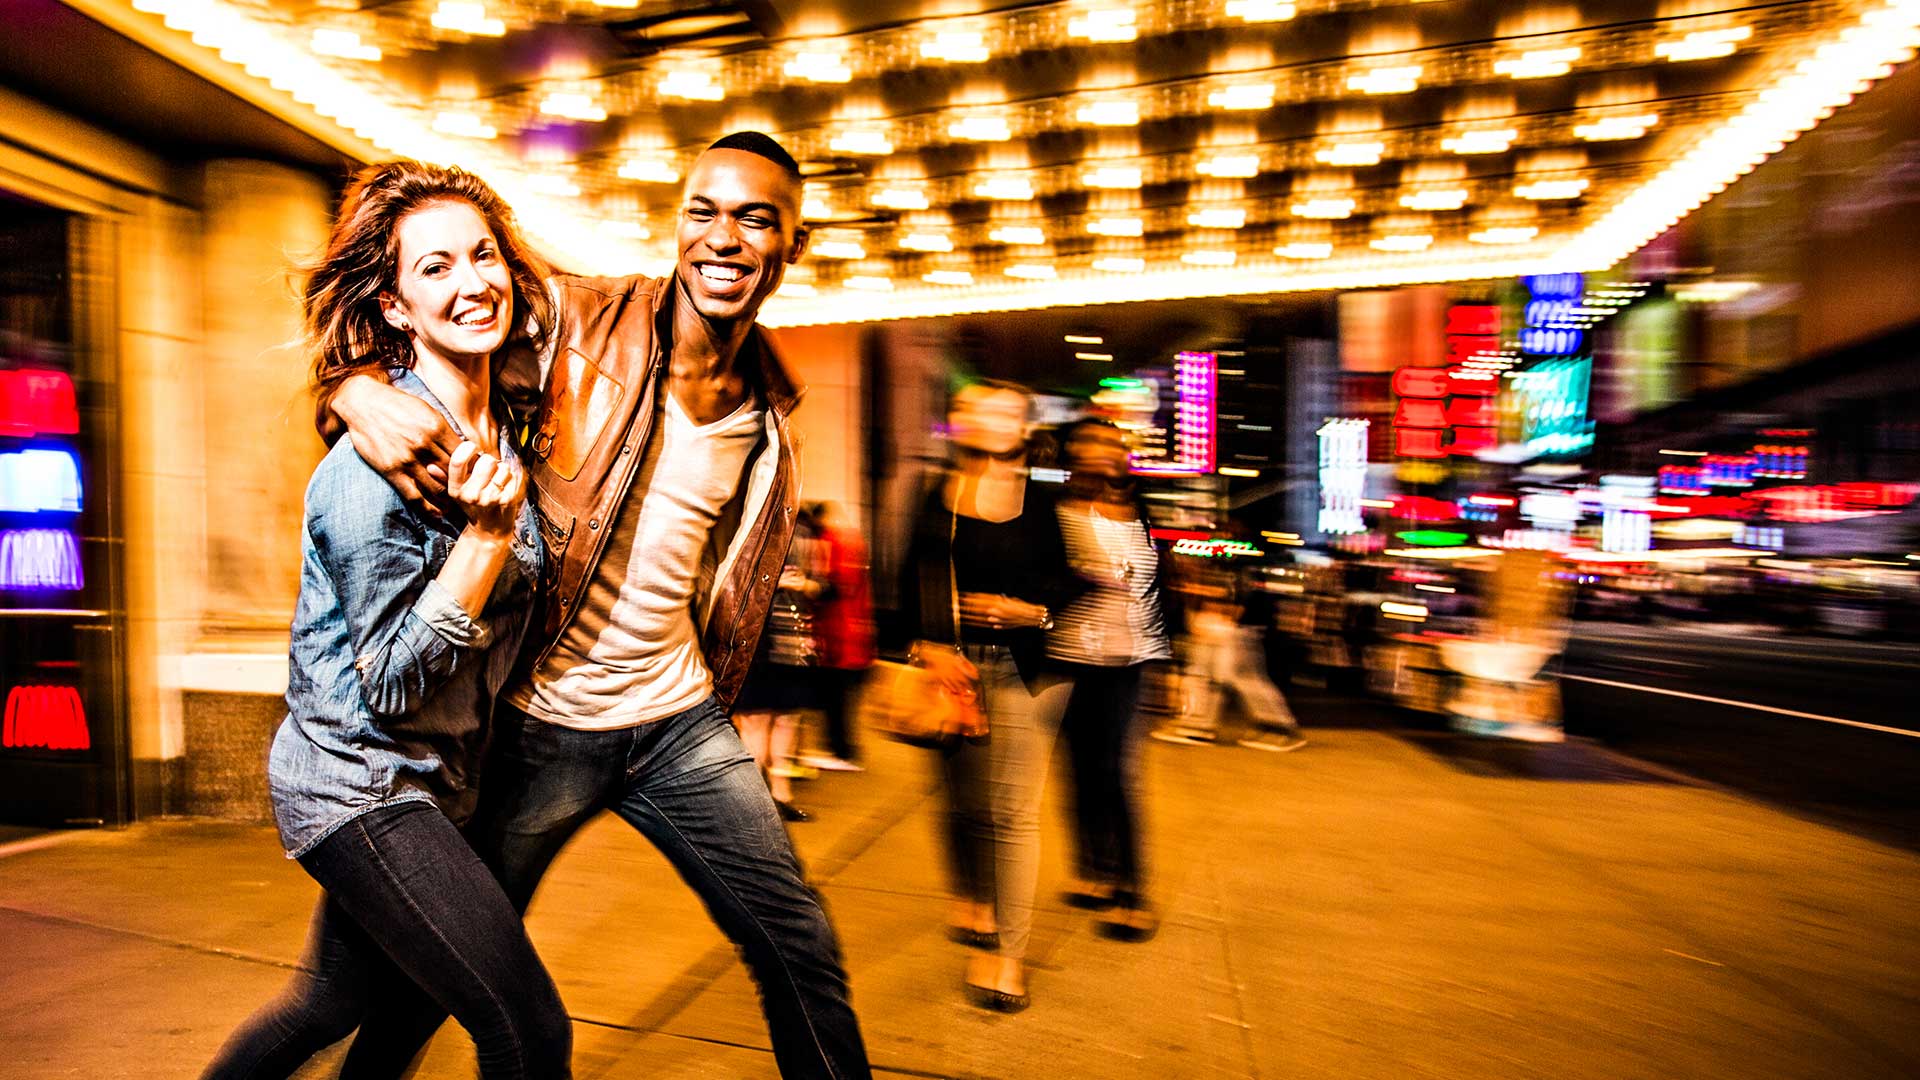 A couple exits a theater and smiles to the camera under the lights of the marquee above. City lights are seen blurry in the background.